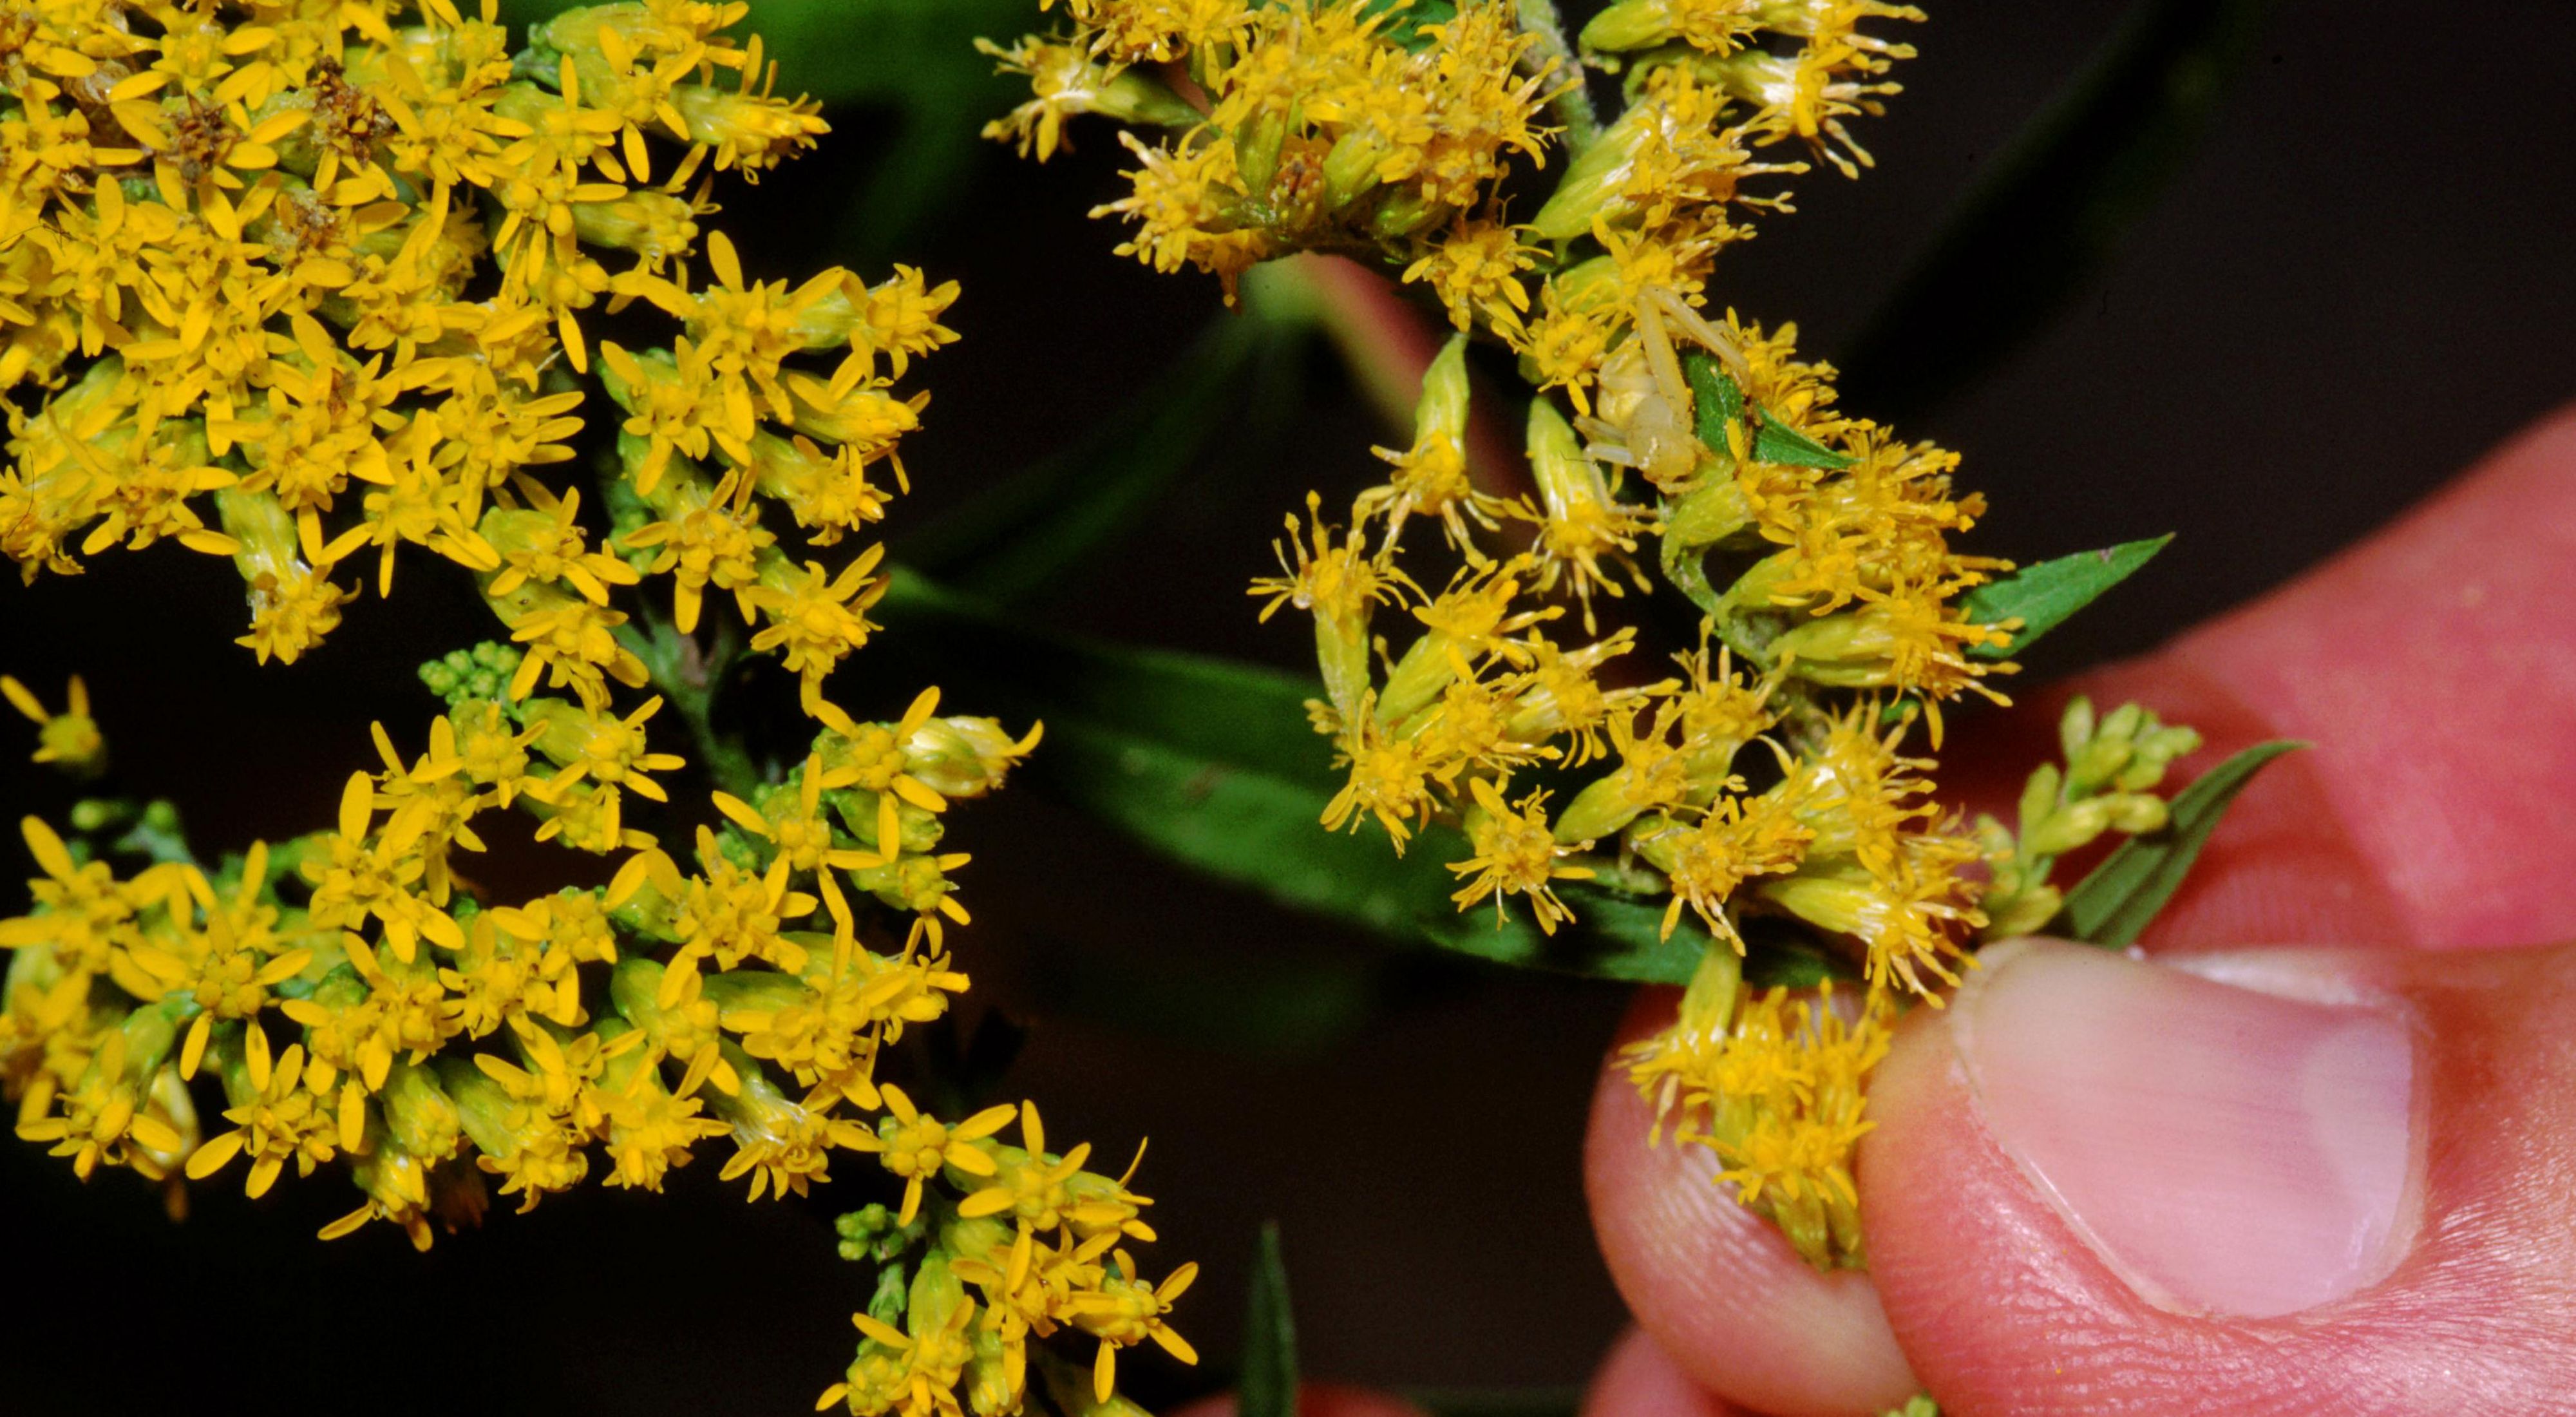 Close-up of slender plant with bright yellow clustered flowers.